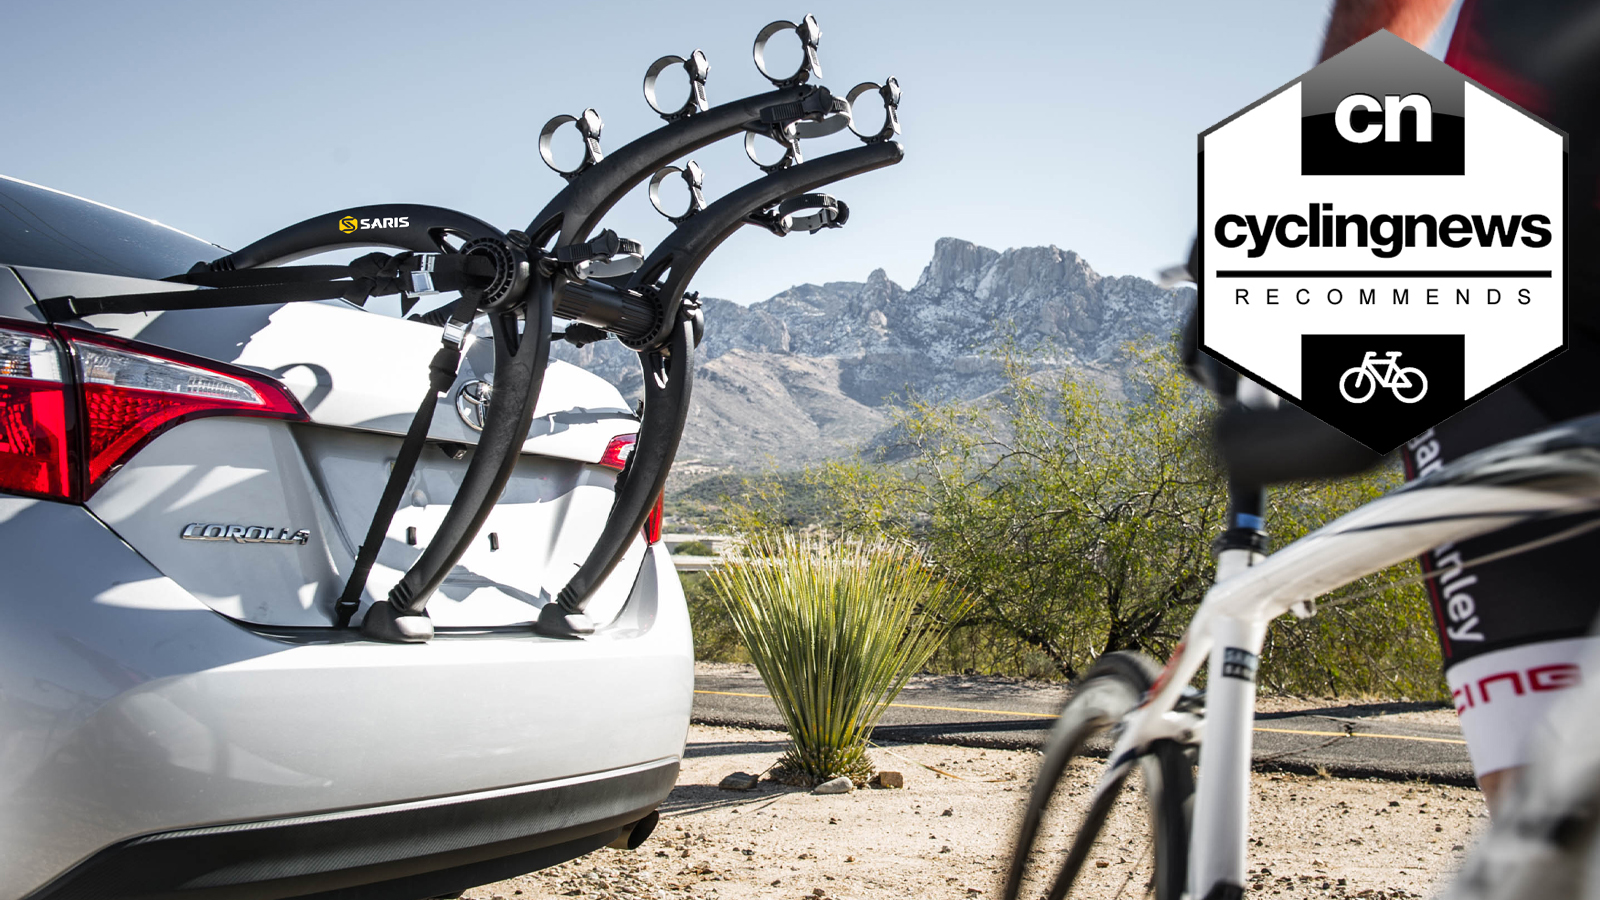 Best trunk bike racks: The easiest option to safely and securely